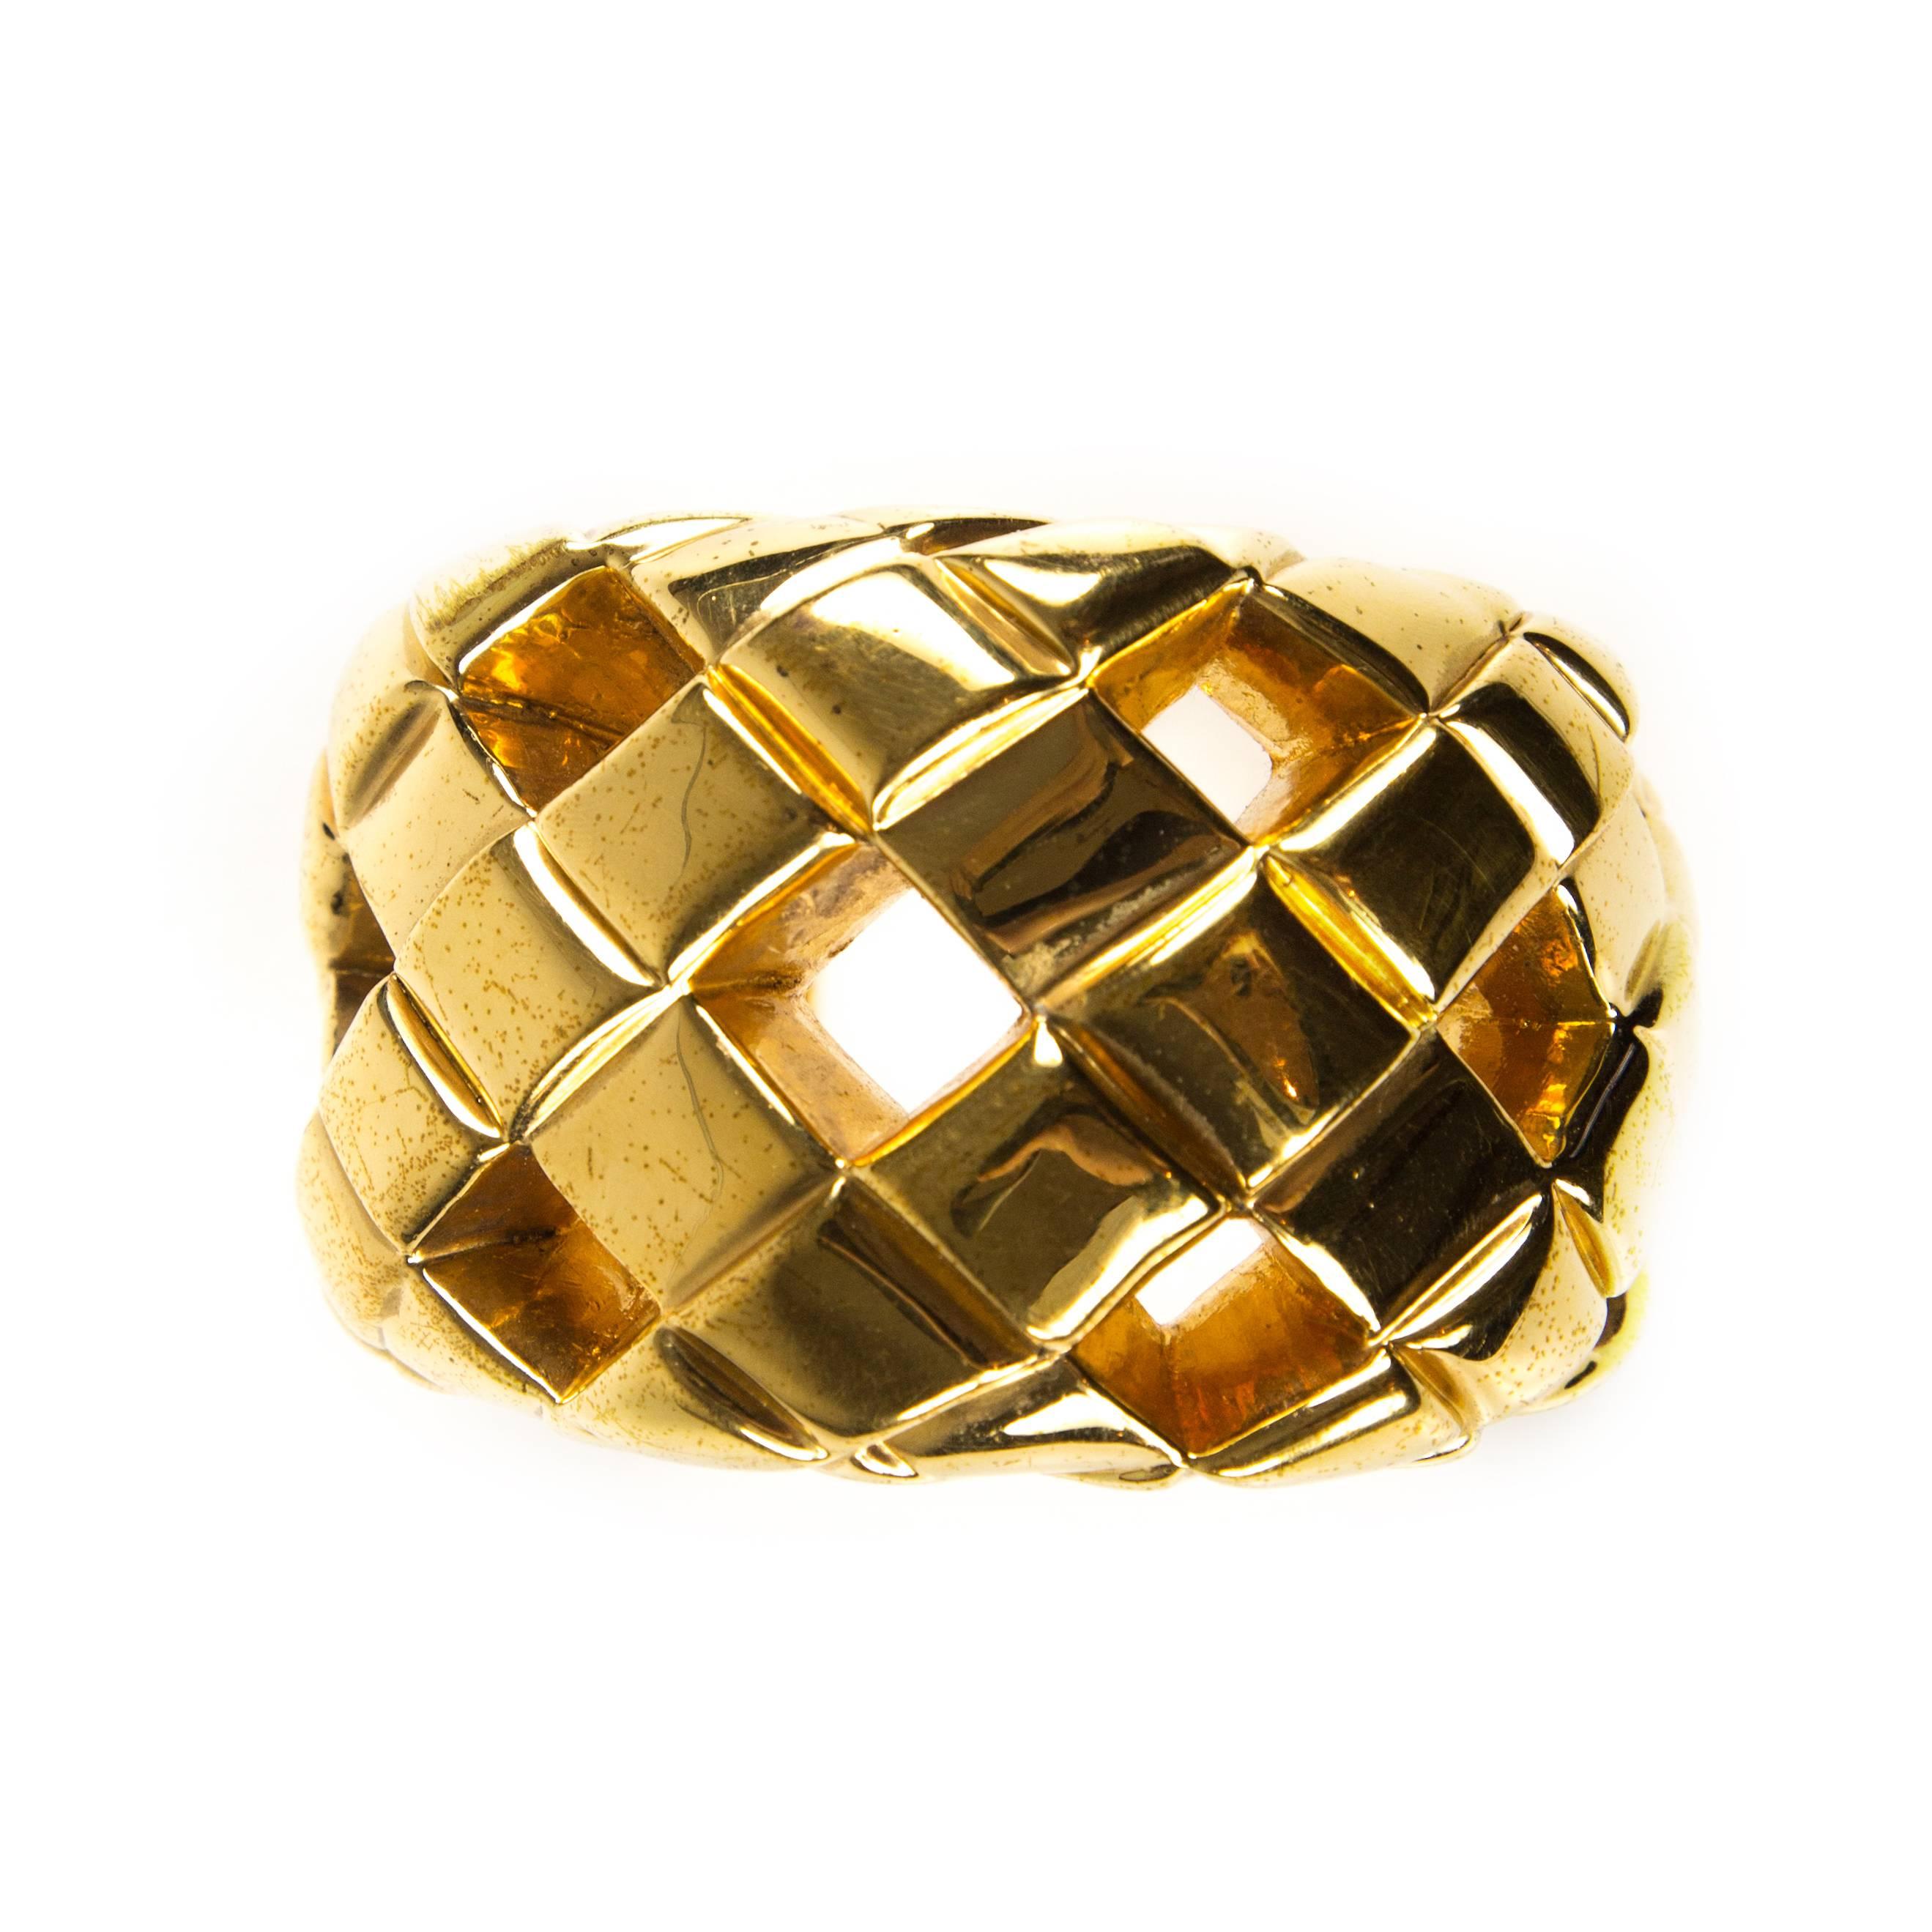 Chanel - Rare Cut Out Vintage Cuff Bracelet

Color: Gold

Material: Metal

------------------------------------------------------------
 
Details:

- quilted / woven metal pattern

- diamond cut outs throughout

- gond-tone